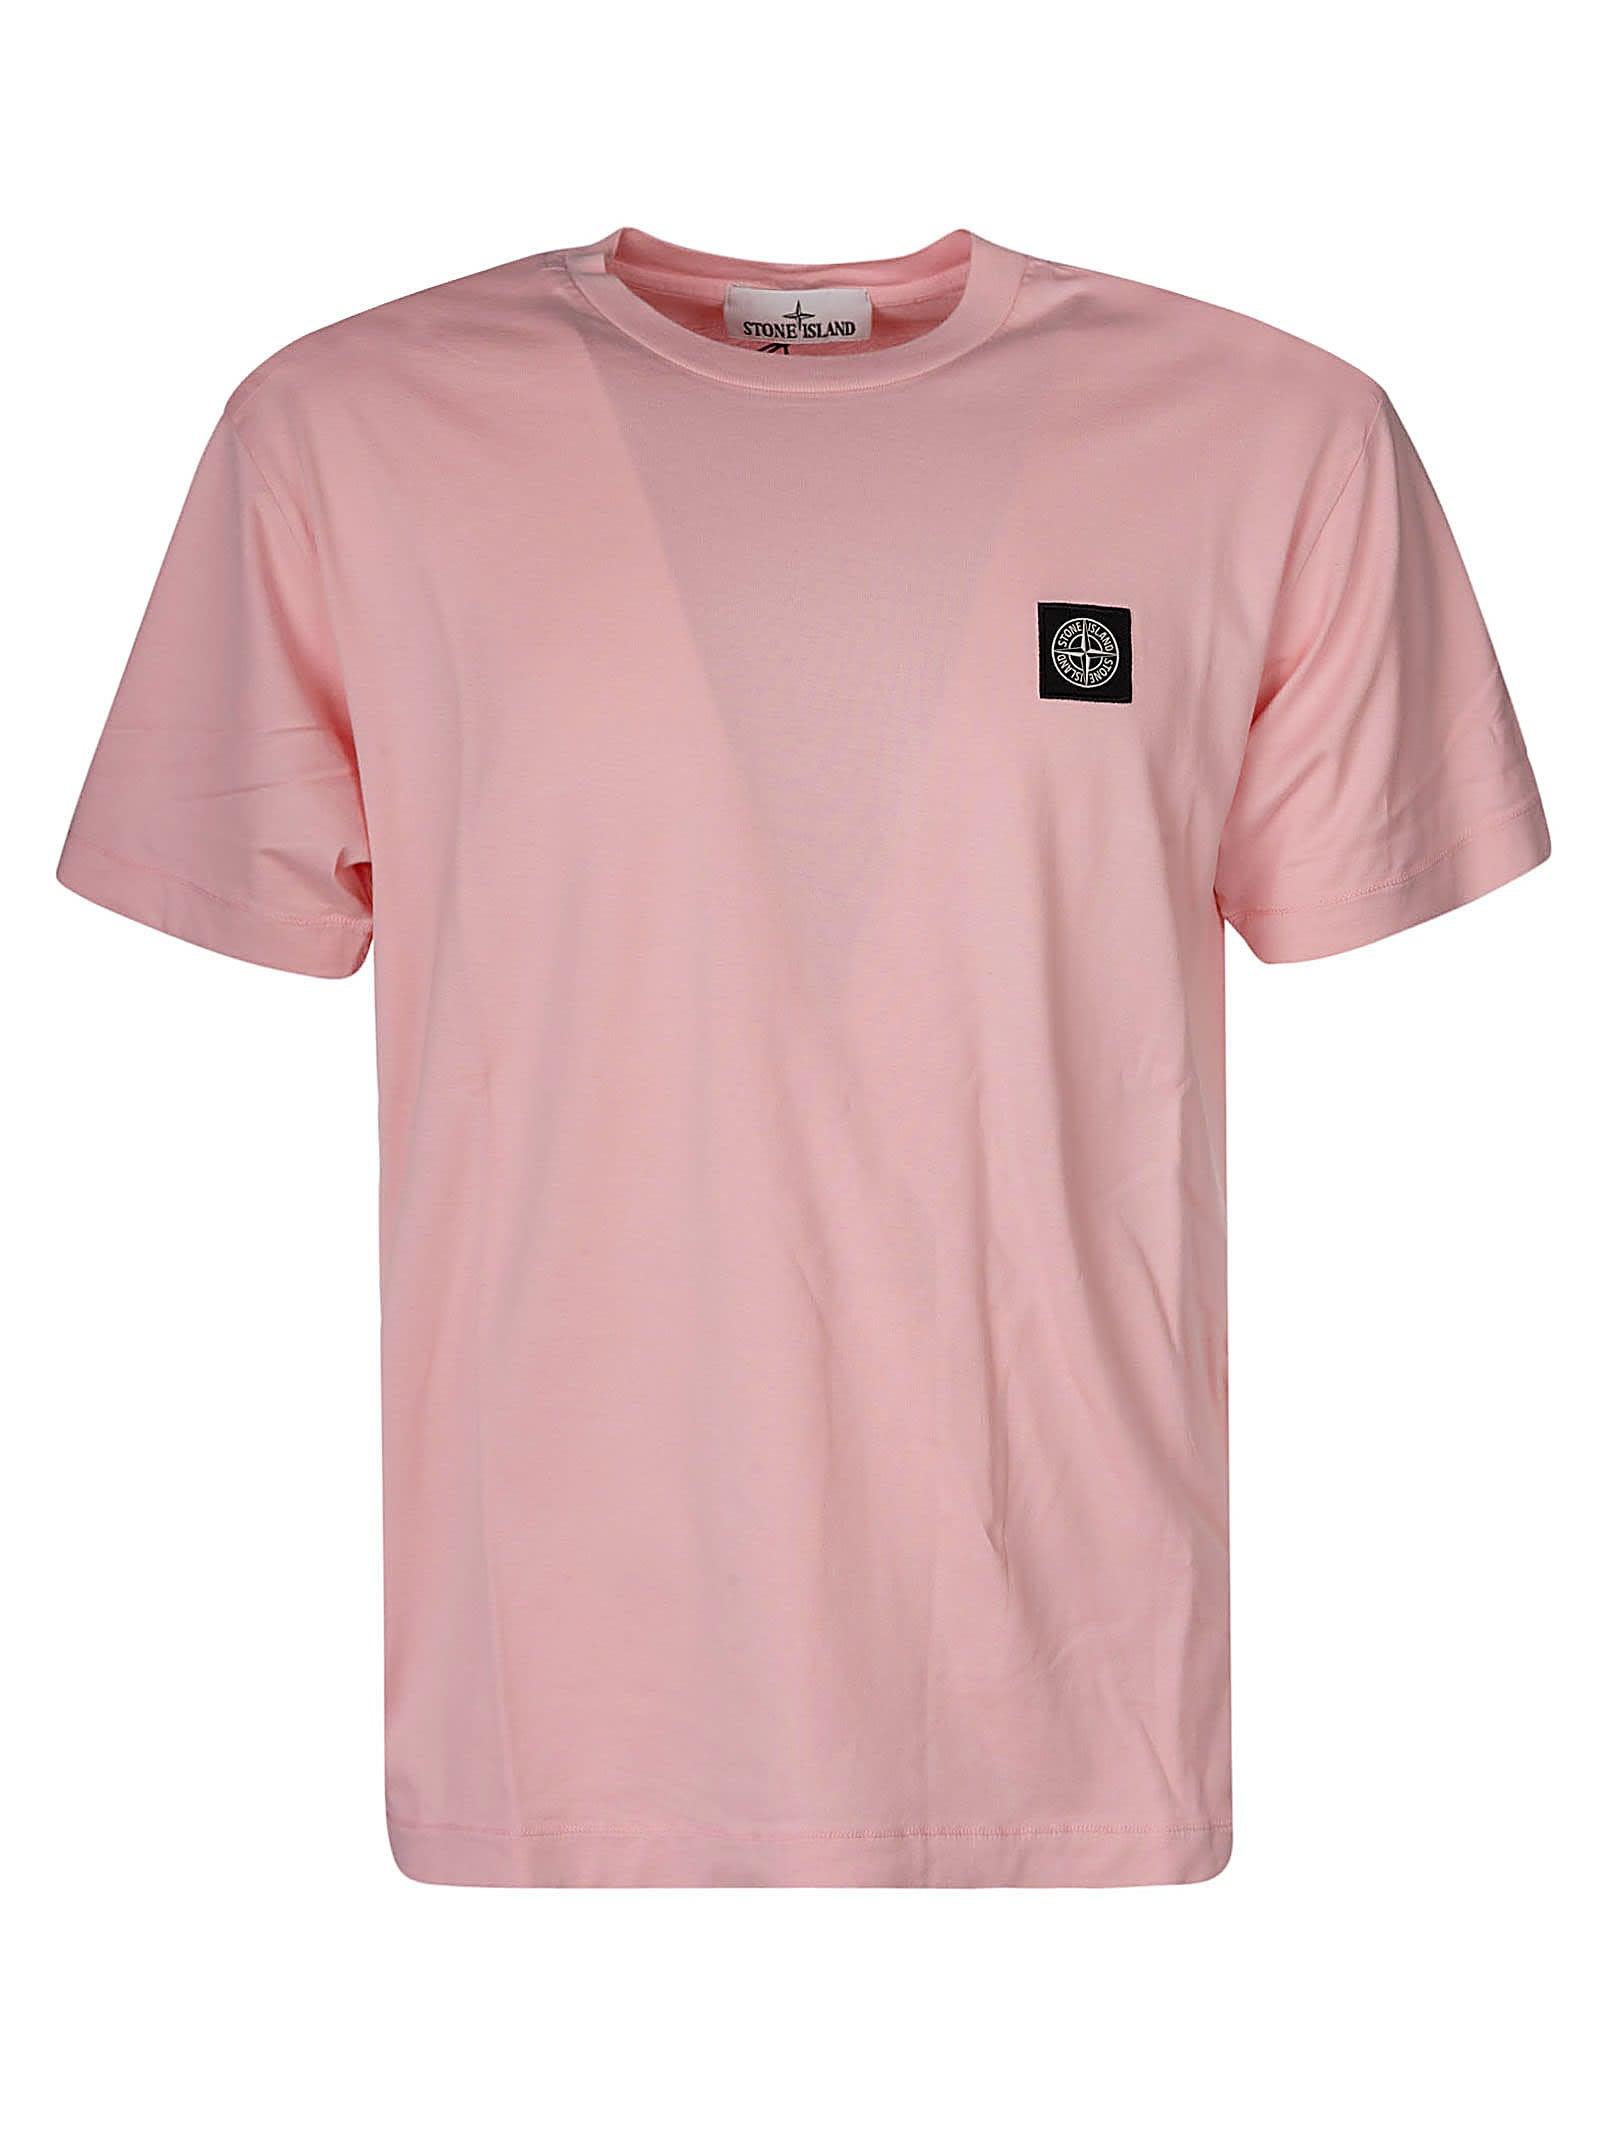 Stone Island Pink Compass T-shirt for Men | Lyst